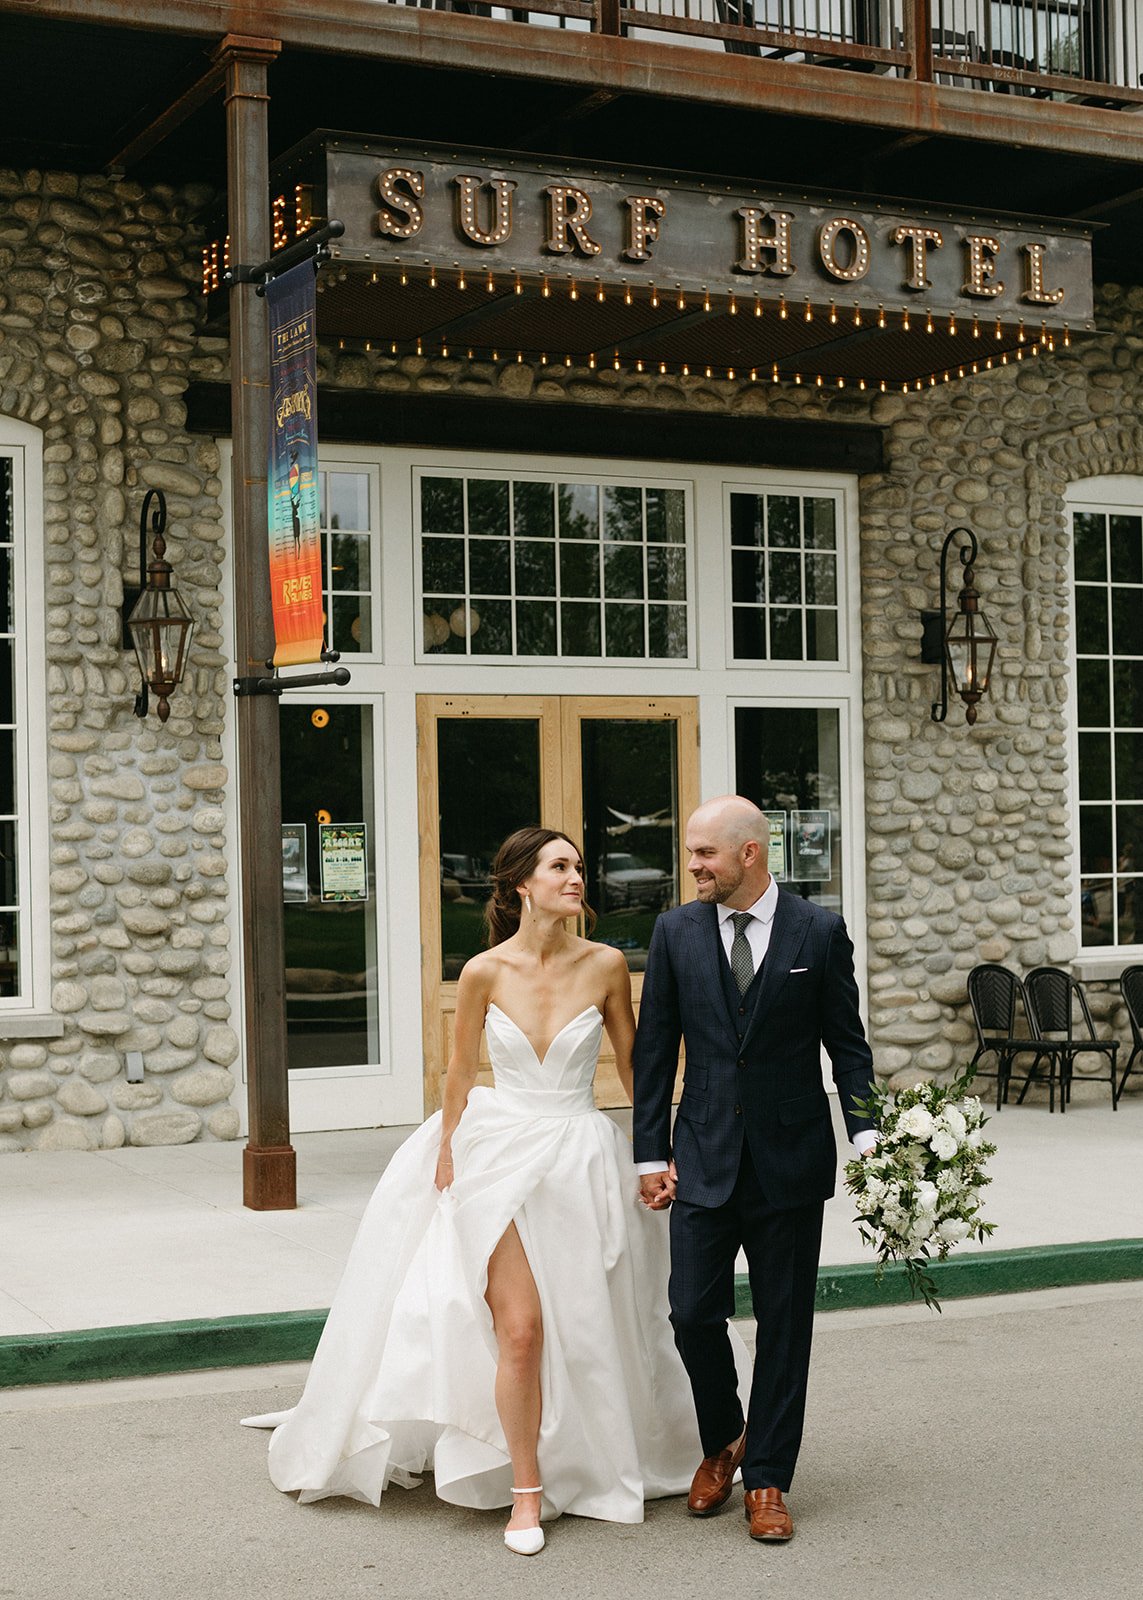 a bridal portrait in front of the surf hotel featuring a ball gown by ines di santo